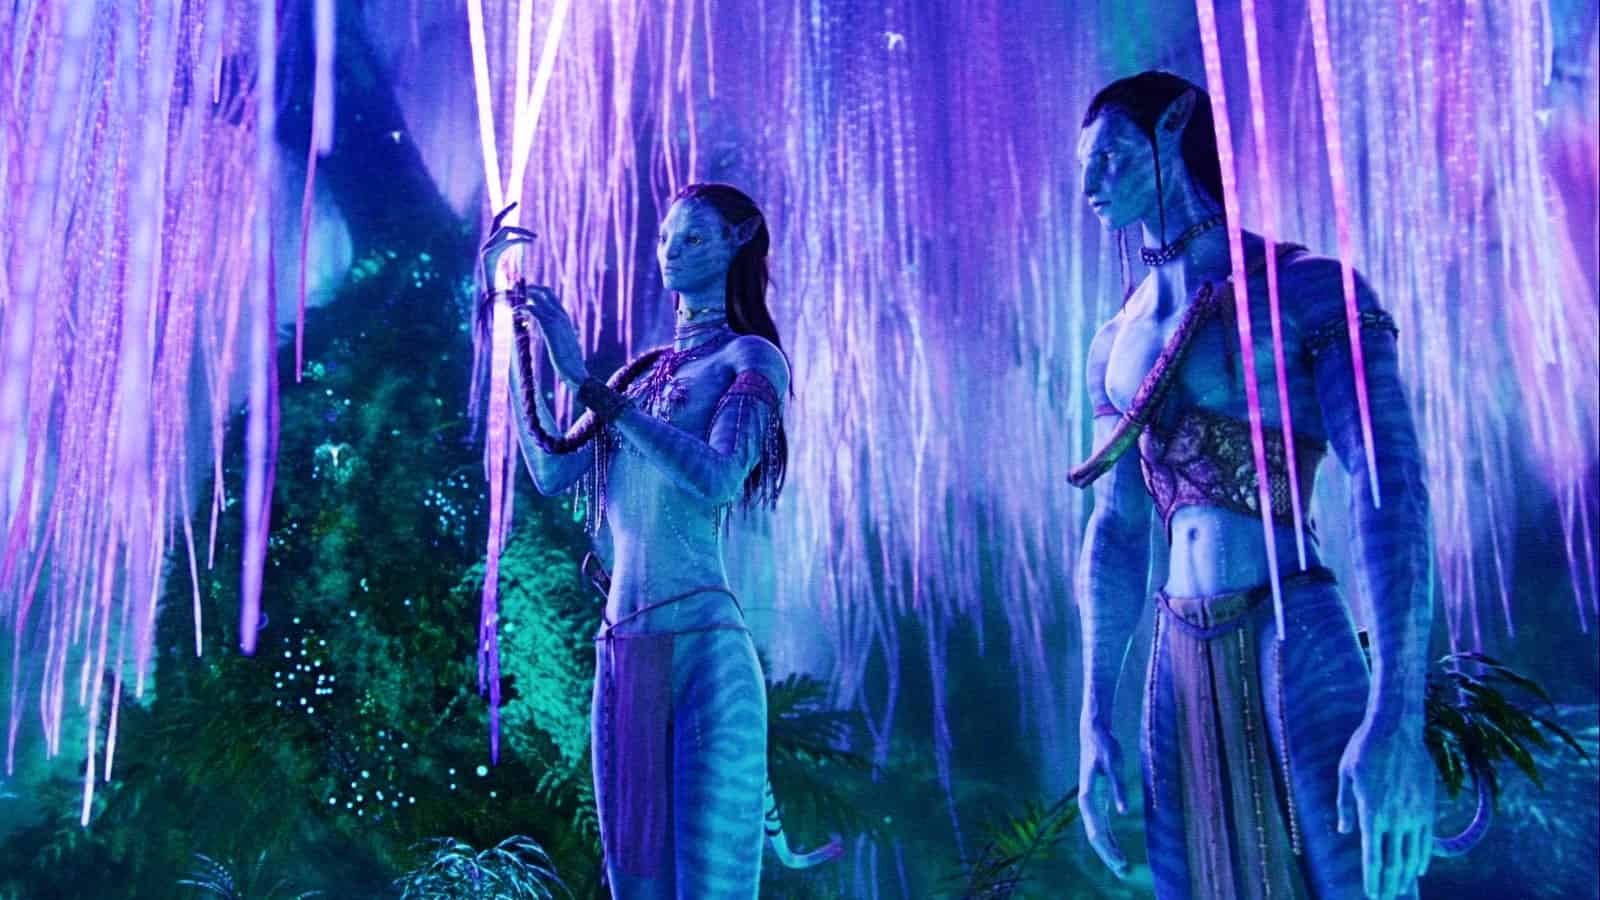 Avatar 3 Official First Look Revealed By Disney, See The Jaw